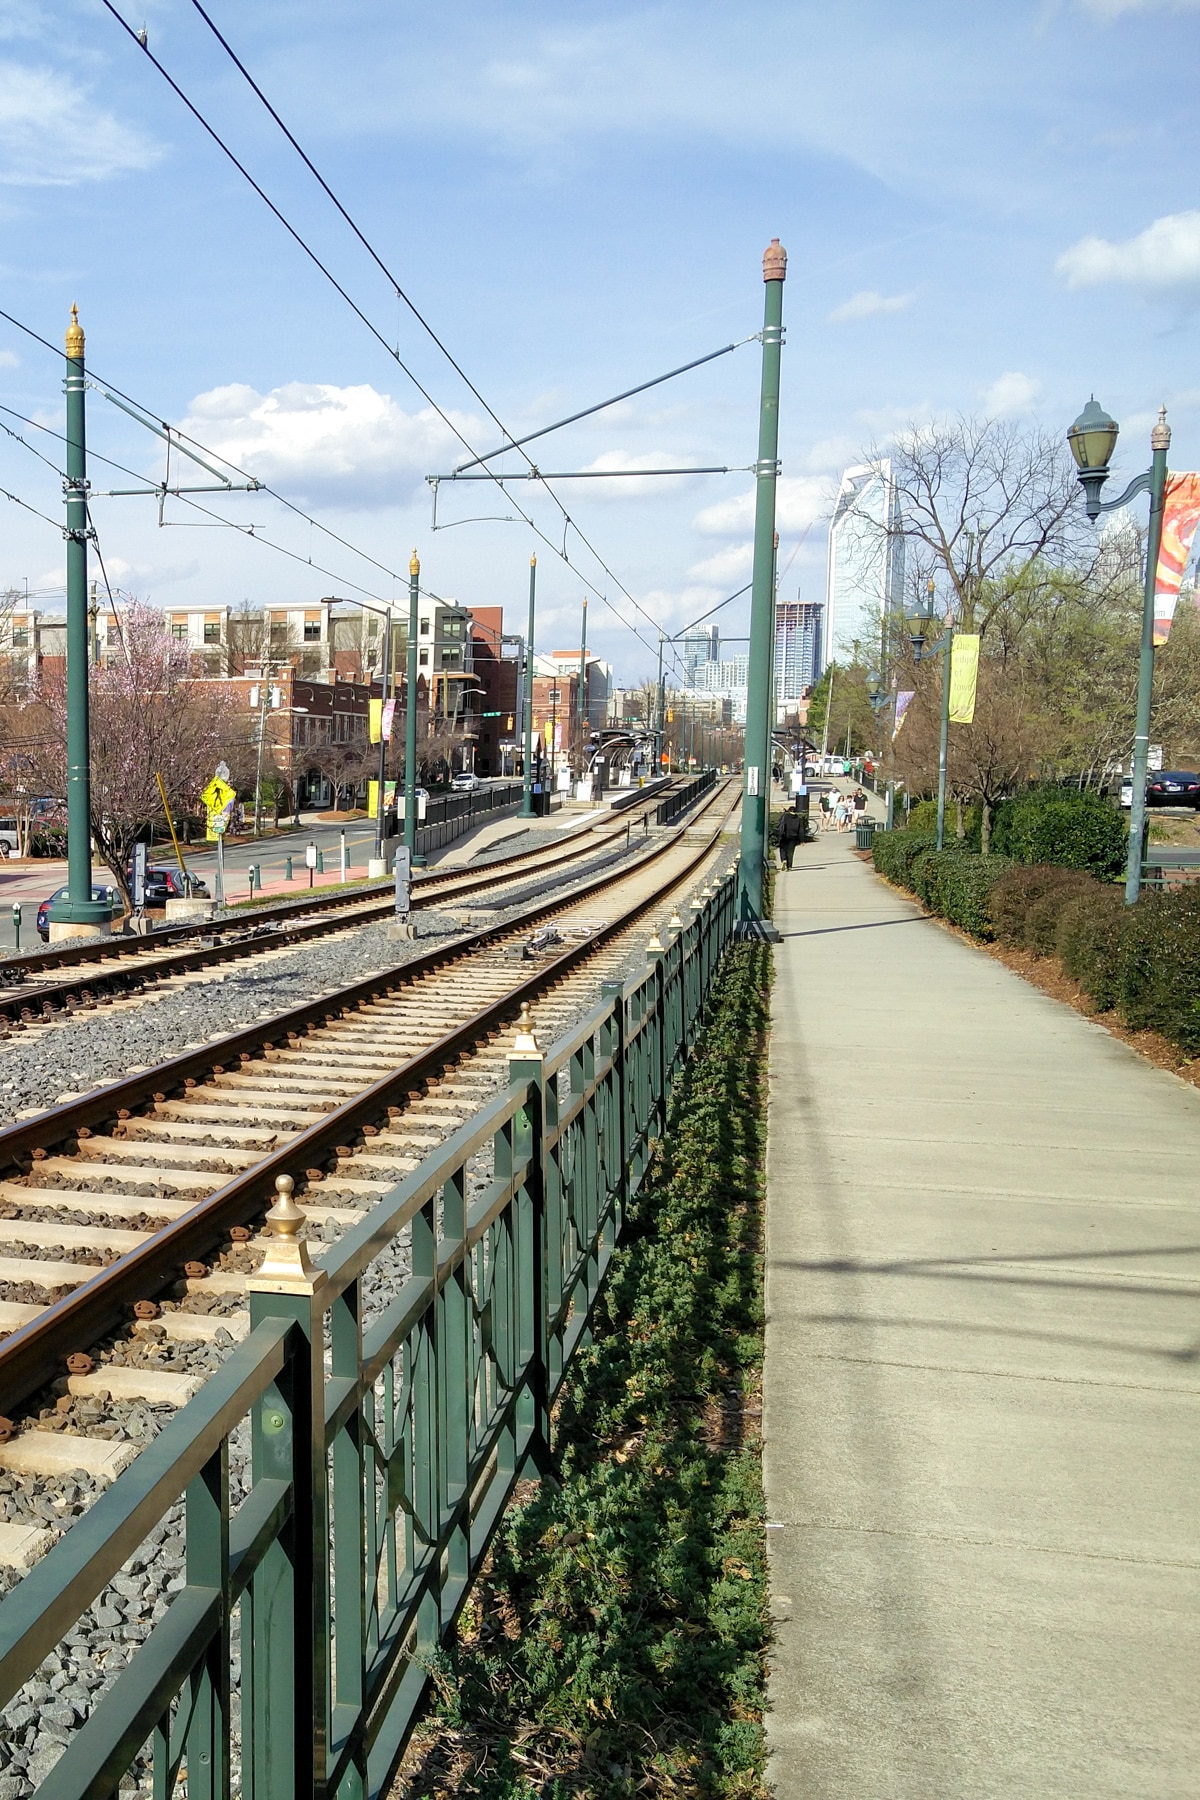 The Charlotte Rail Trail is a great way to explore Charlotte from Uptown through South End. There are plenty of restaurants, shops, pocket parks, and breweries along the way!